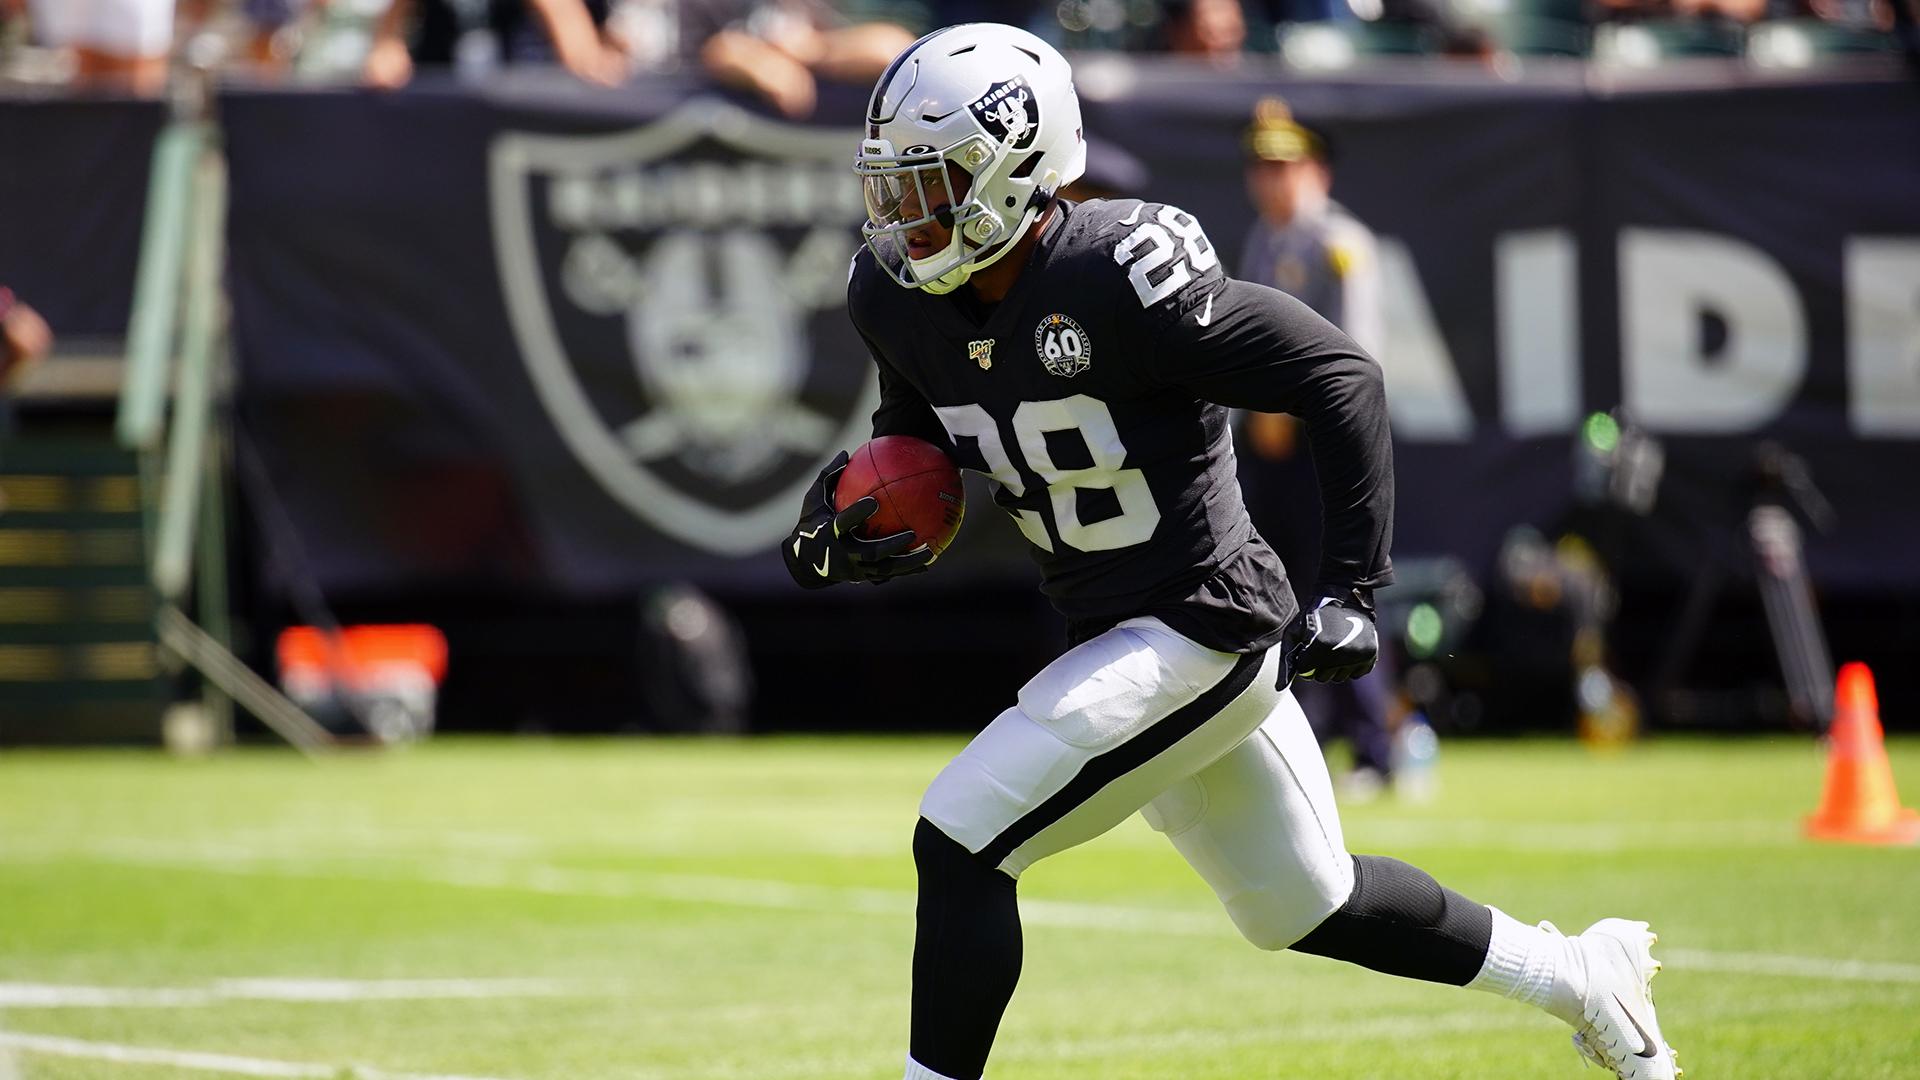 Raiders rookie Josh Jacobs lost 10 pounds this week with an